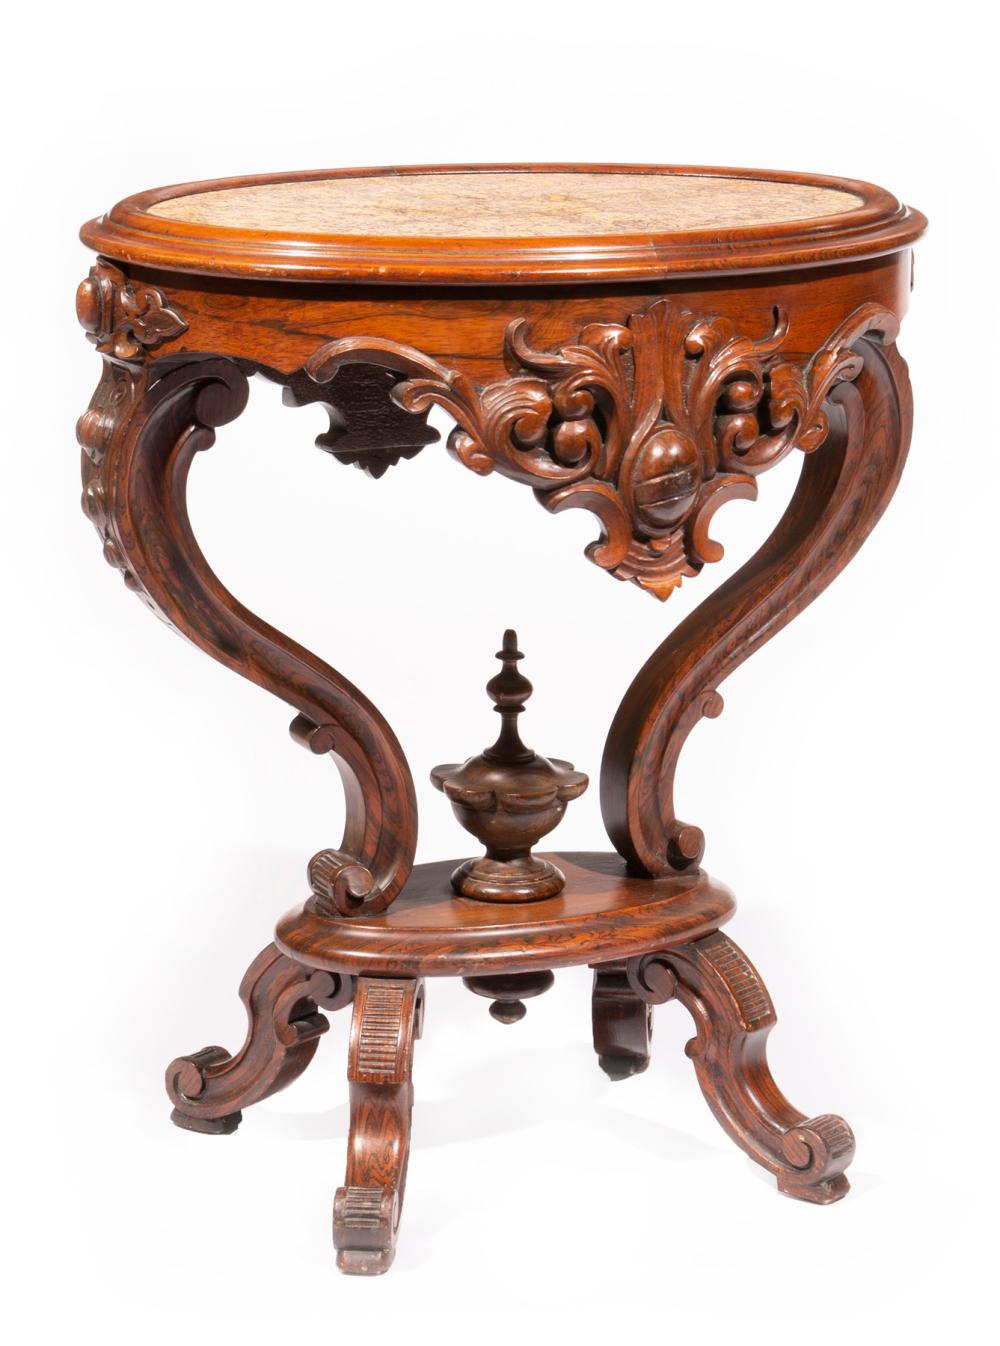 AMERICAN ROCOCO CARVED ROSEWOOD SIDE